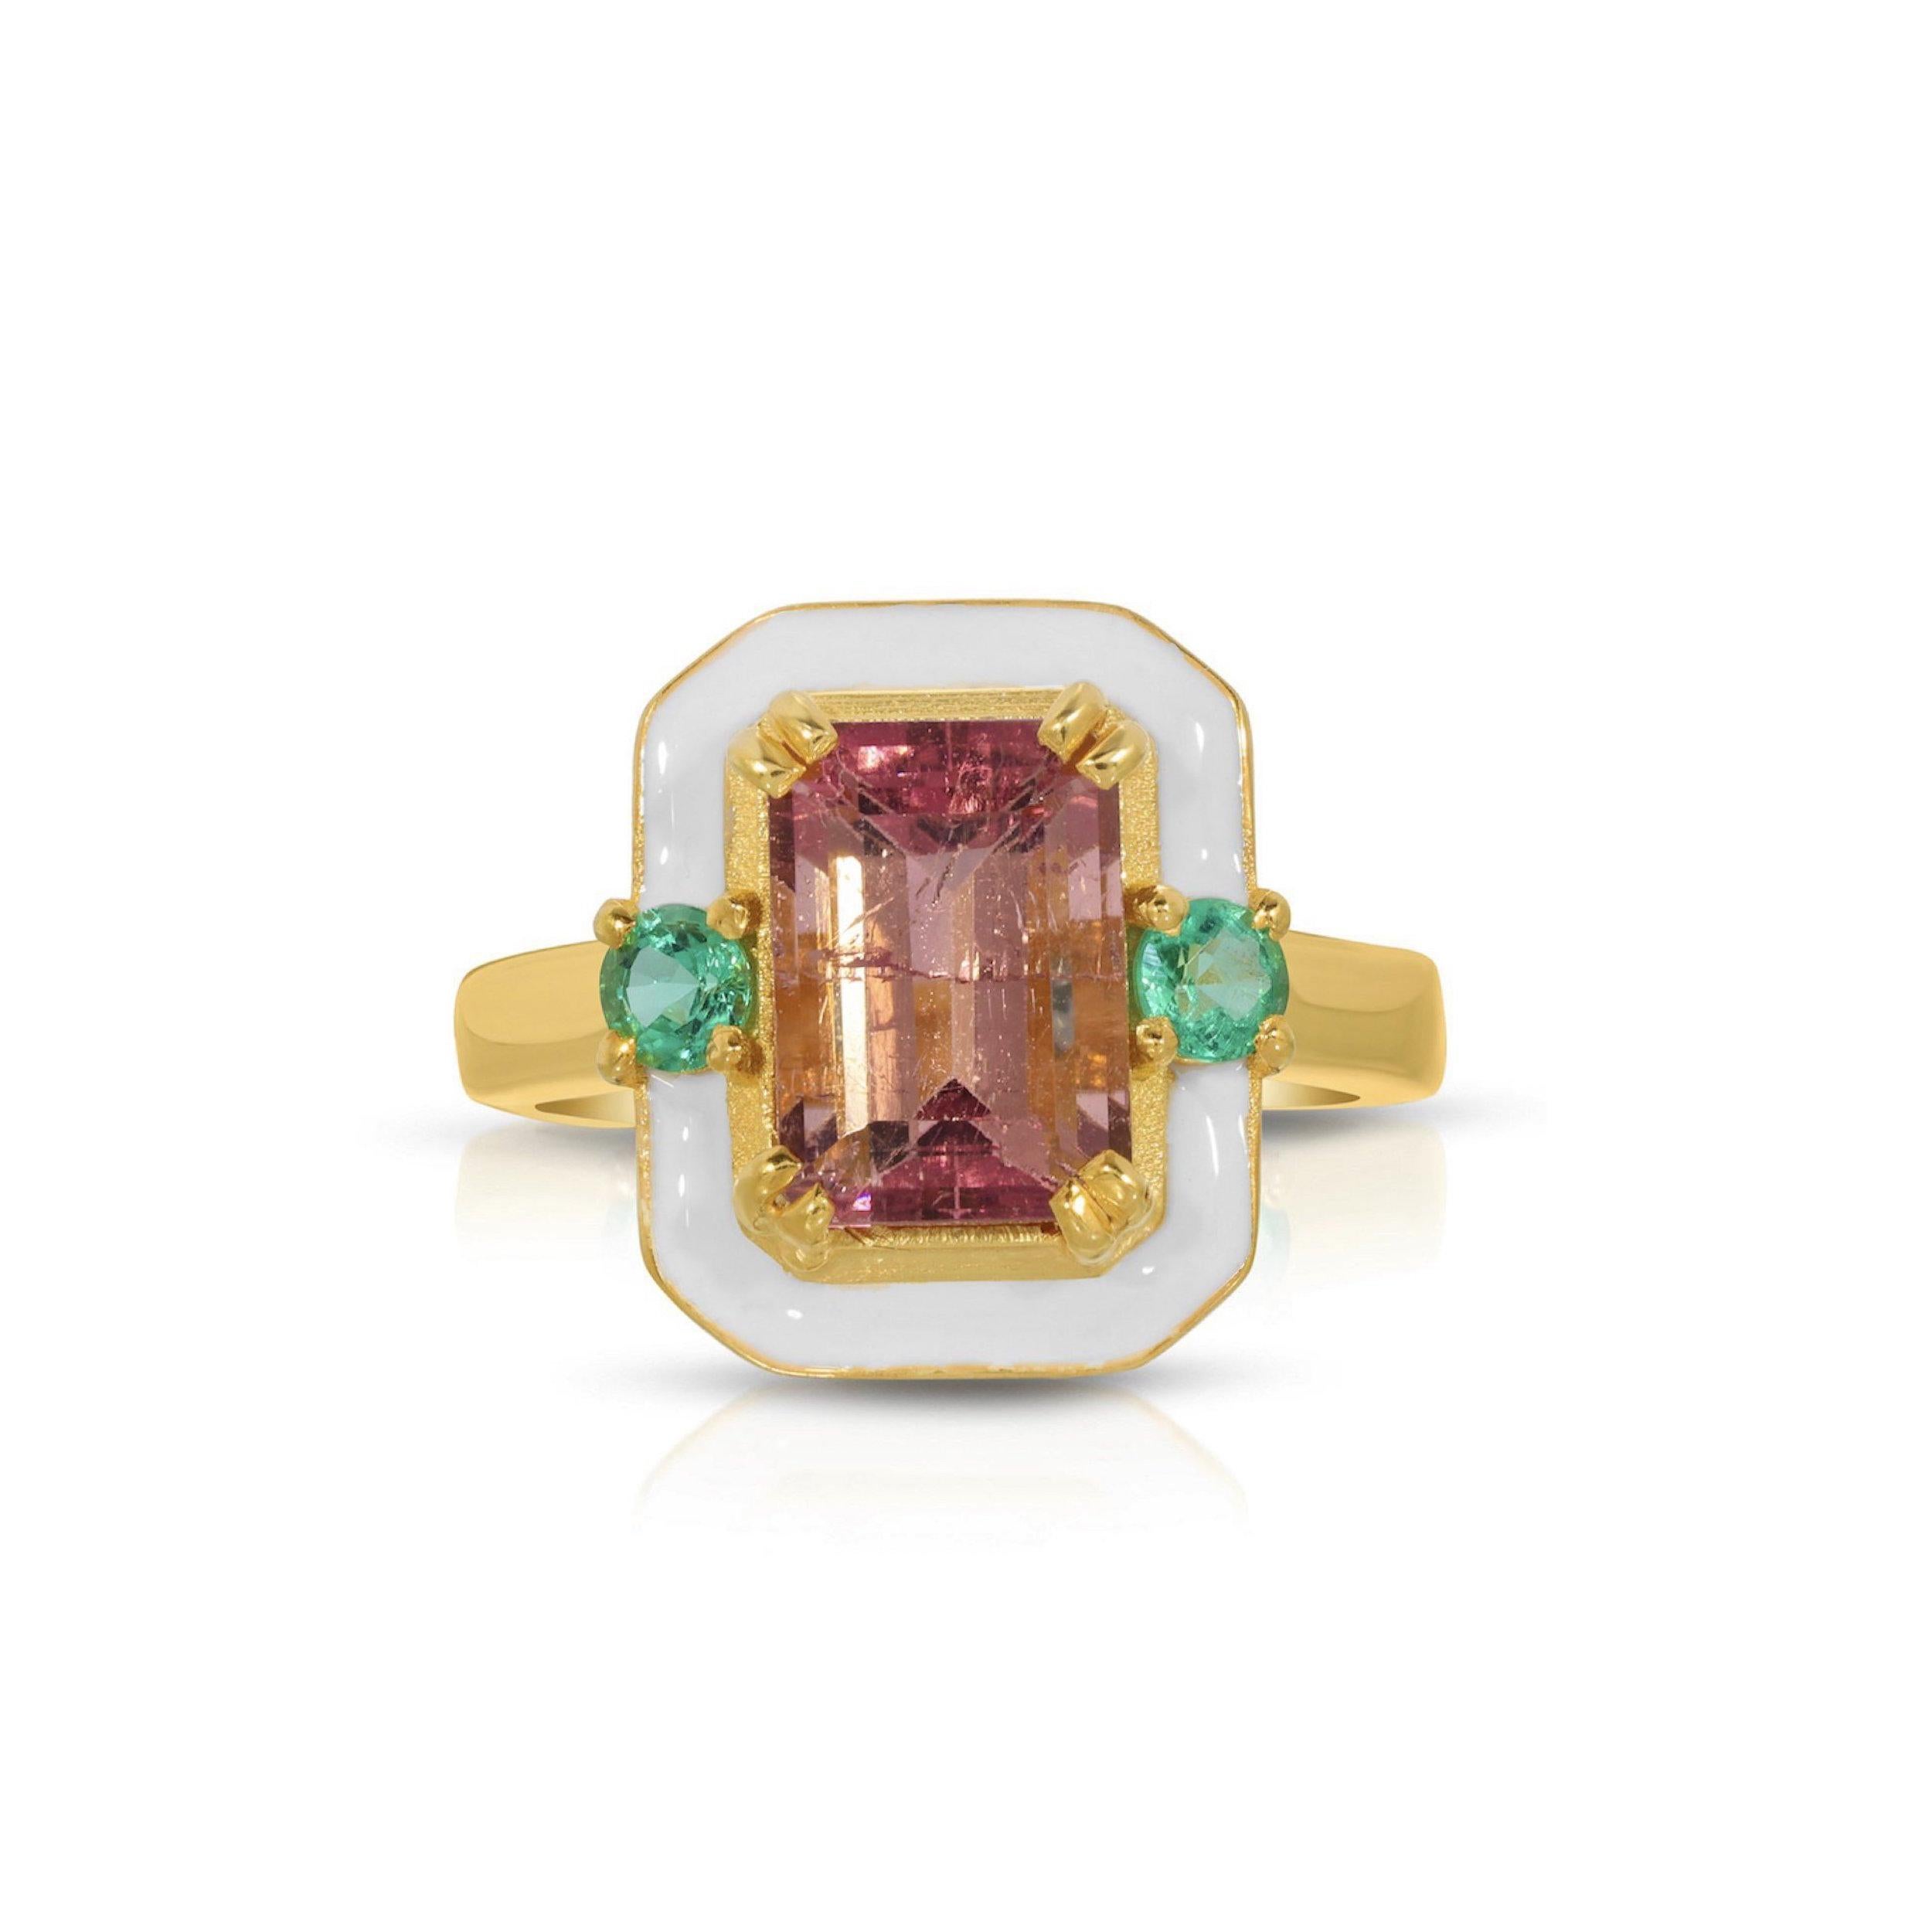 A gorgeous cocktail ring of modern design with a mix of gemstones and enamel. This ring features a beautiful emerald cut Pink Tourmaline center stone set with two round cut fiery Emeralds and glossy white enamel. This ring is set in stylish 22 Karat